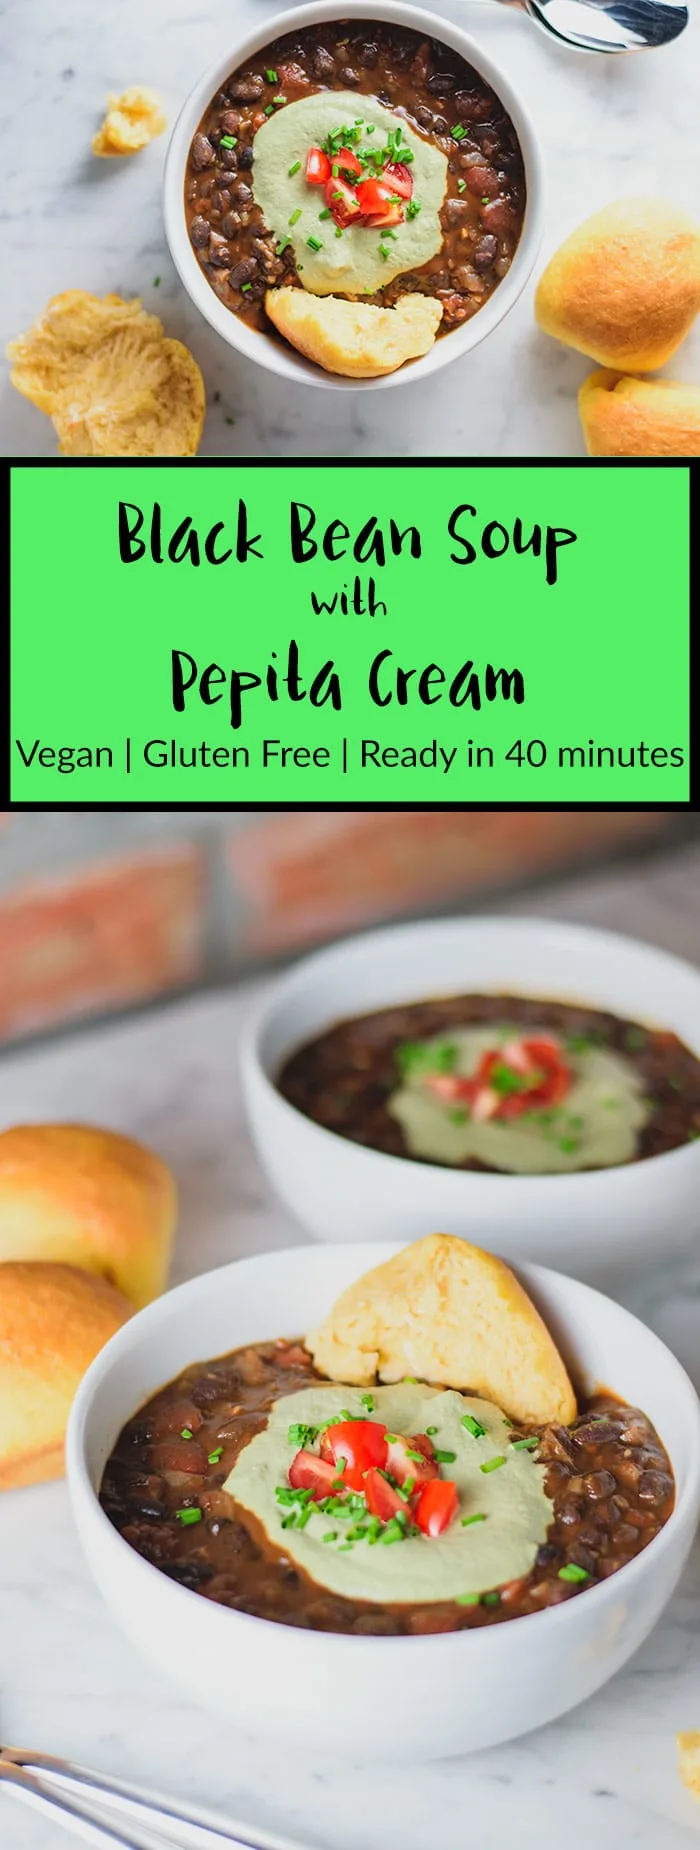 Black Bean Soup with Pepita Cream | Vegan, gluten free soup, cooks up in an easy 40 minutes. A flavorful and healthy black bean soup is served with a velvety smooth, toasty and nutty tasting pepita-lime cream. | thecuriouschickpea.com #vegan #soup #blackbeans